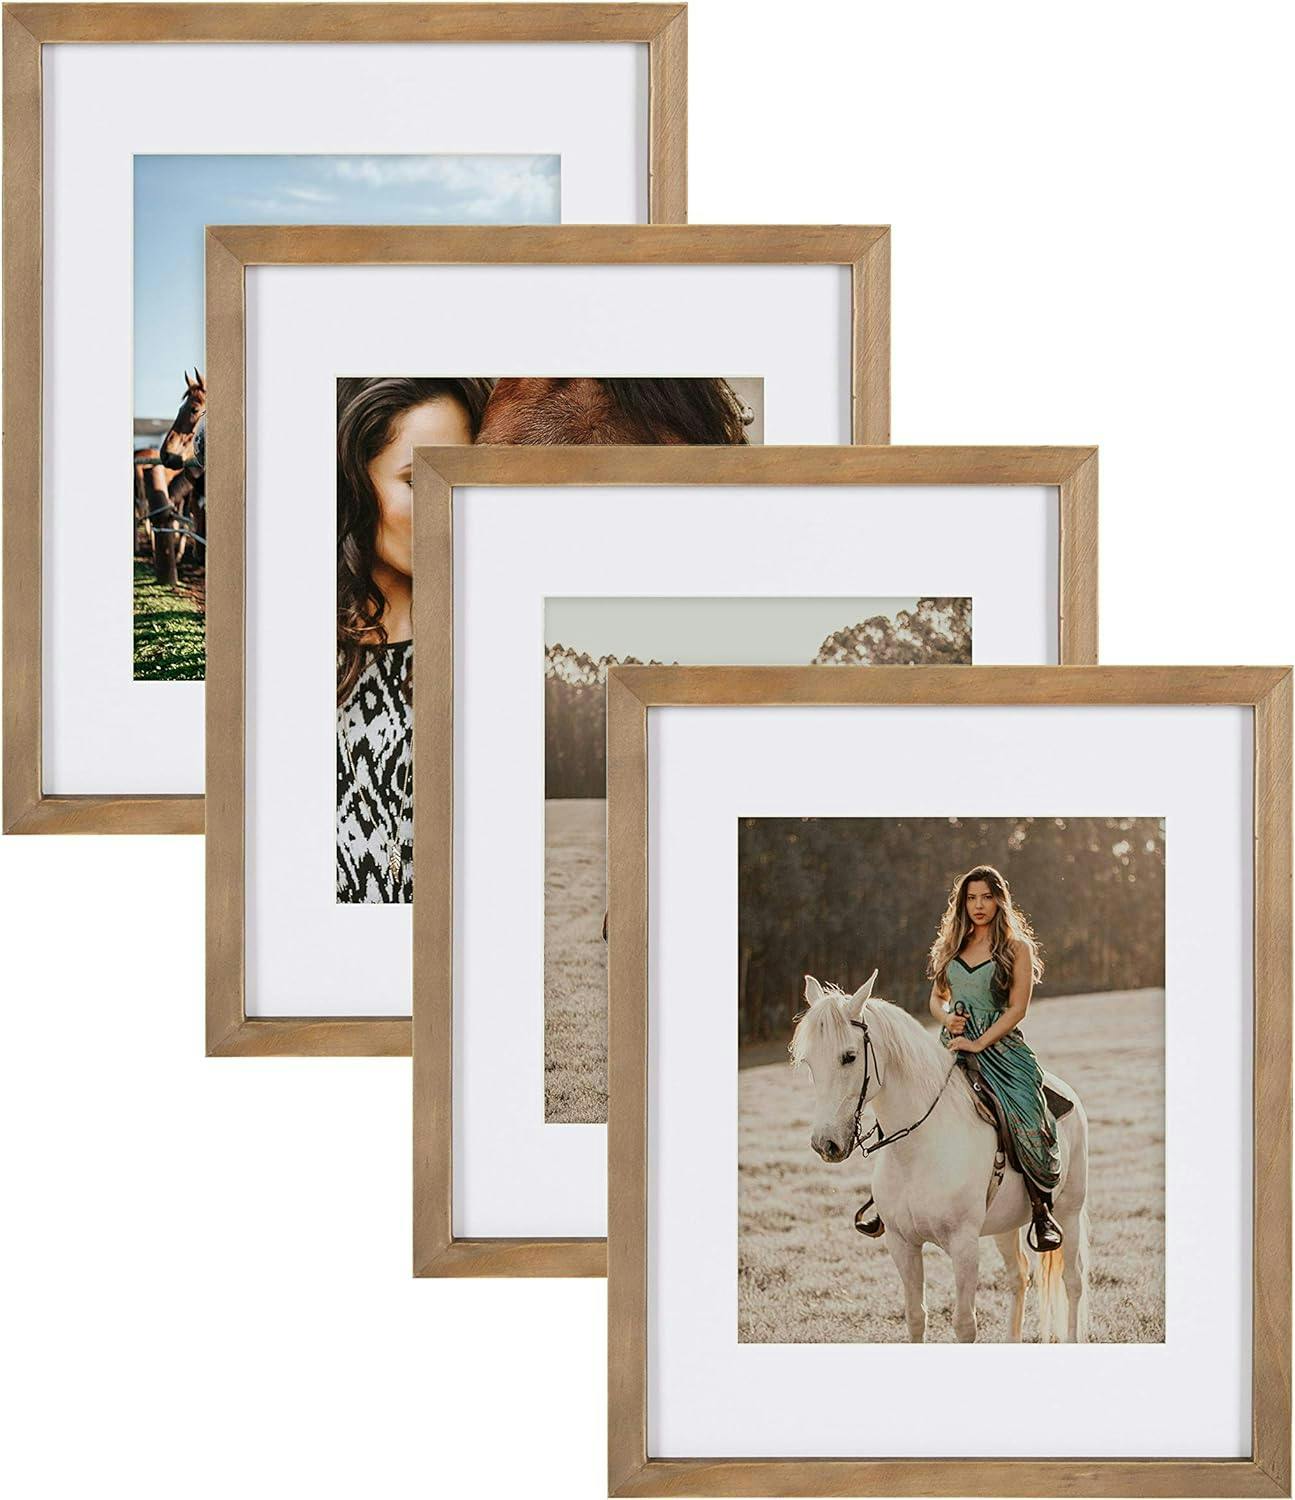 Rustic Brown Wood 12x15 Wall Gallery Frame Set, 11x14 matted to 8x10